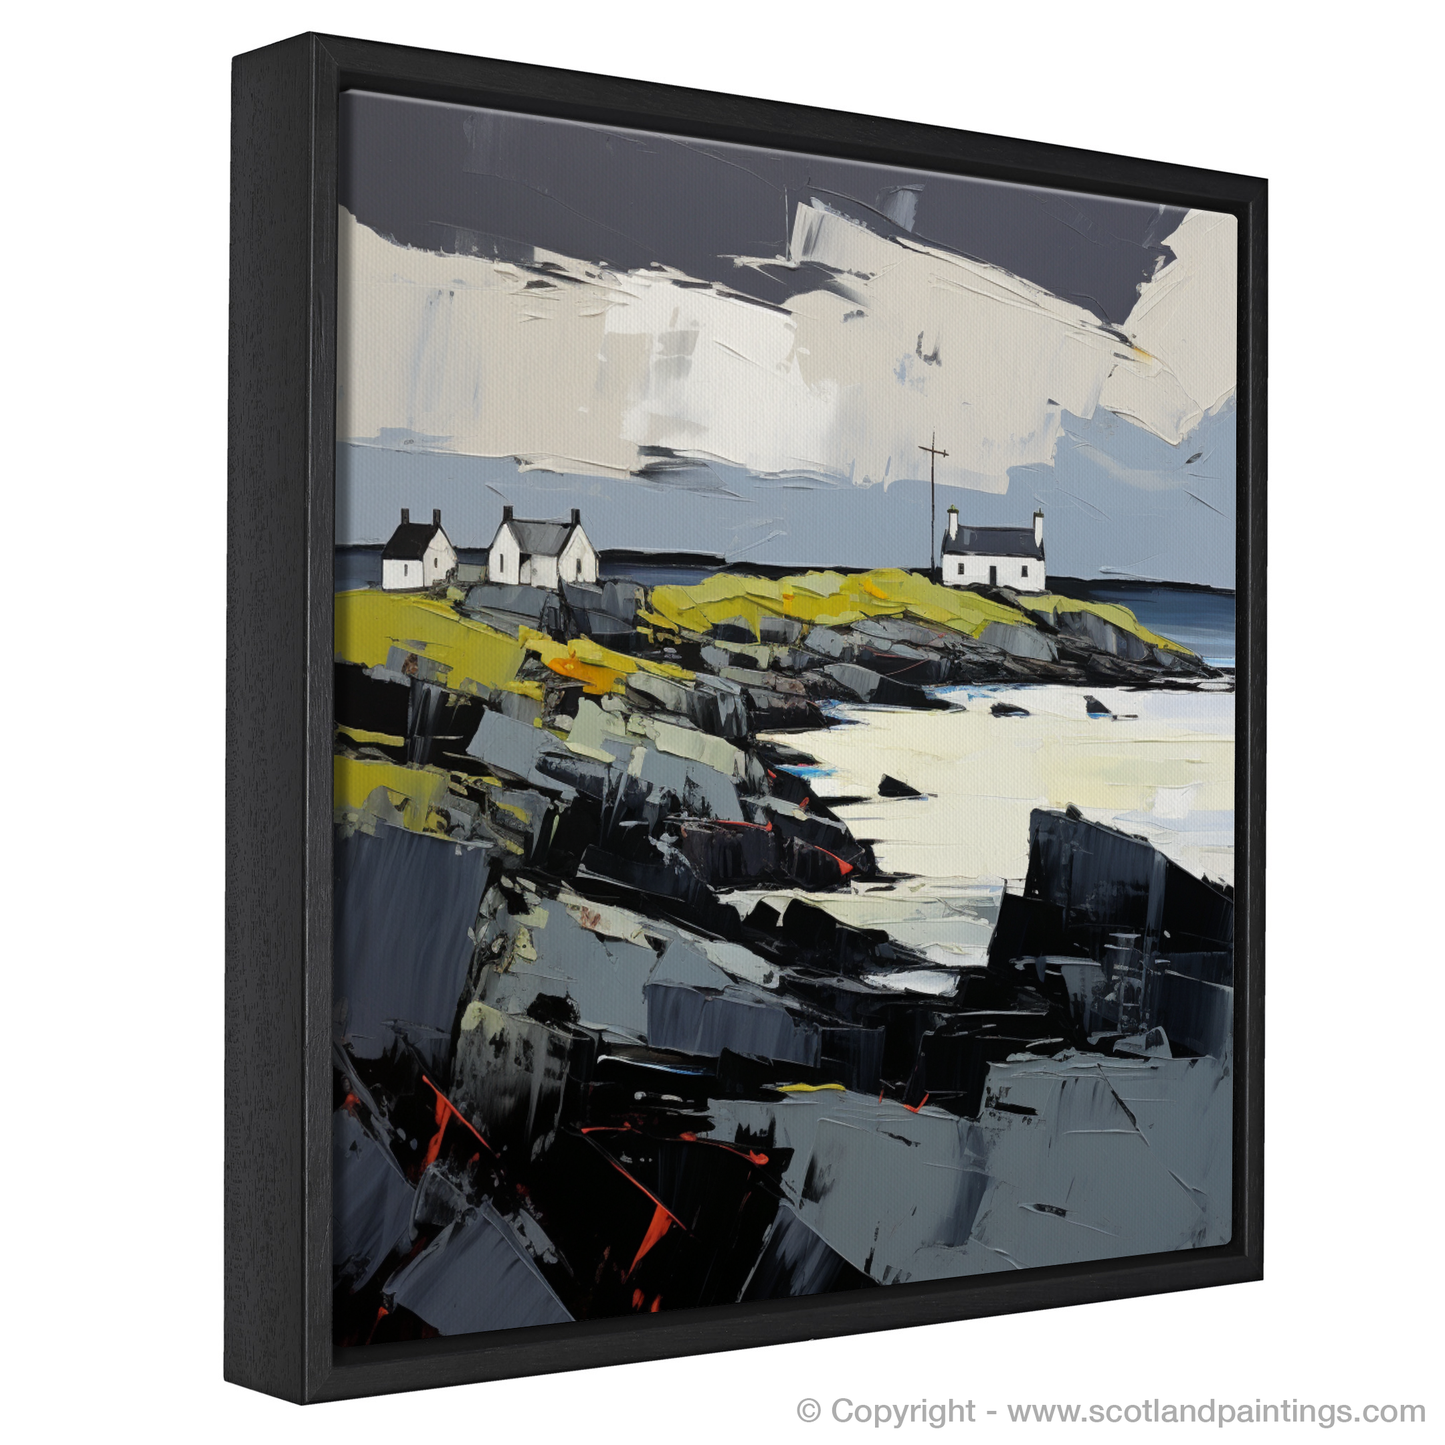 Painting and Art Print of Isle of Barra, Outer Hebrides. Isle of Barra: An Expressionist Ode to the Hebridean Wild.